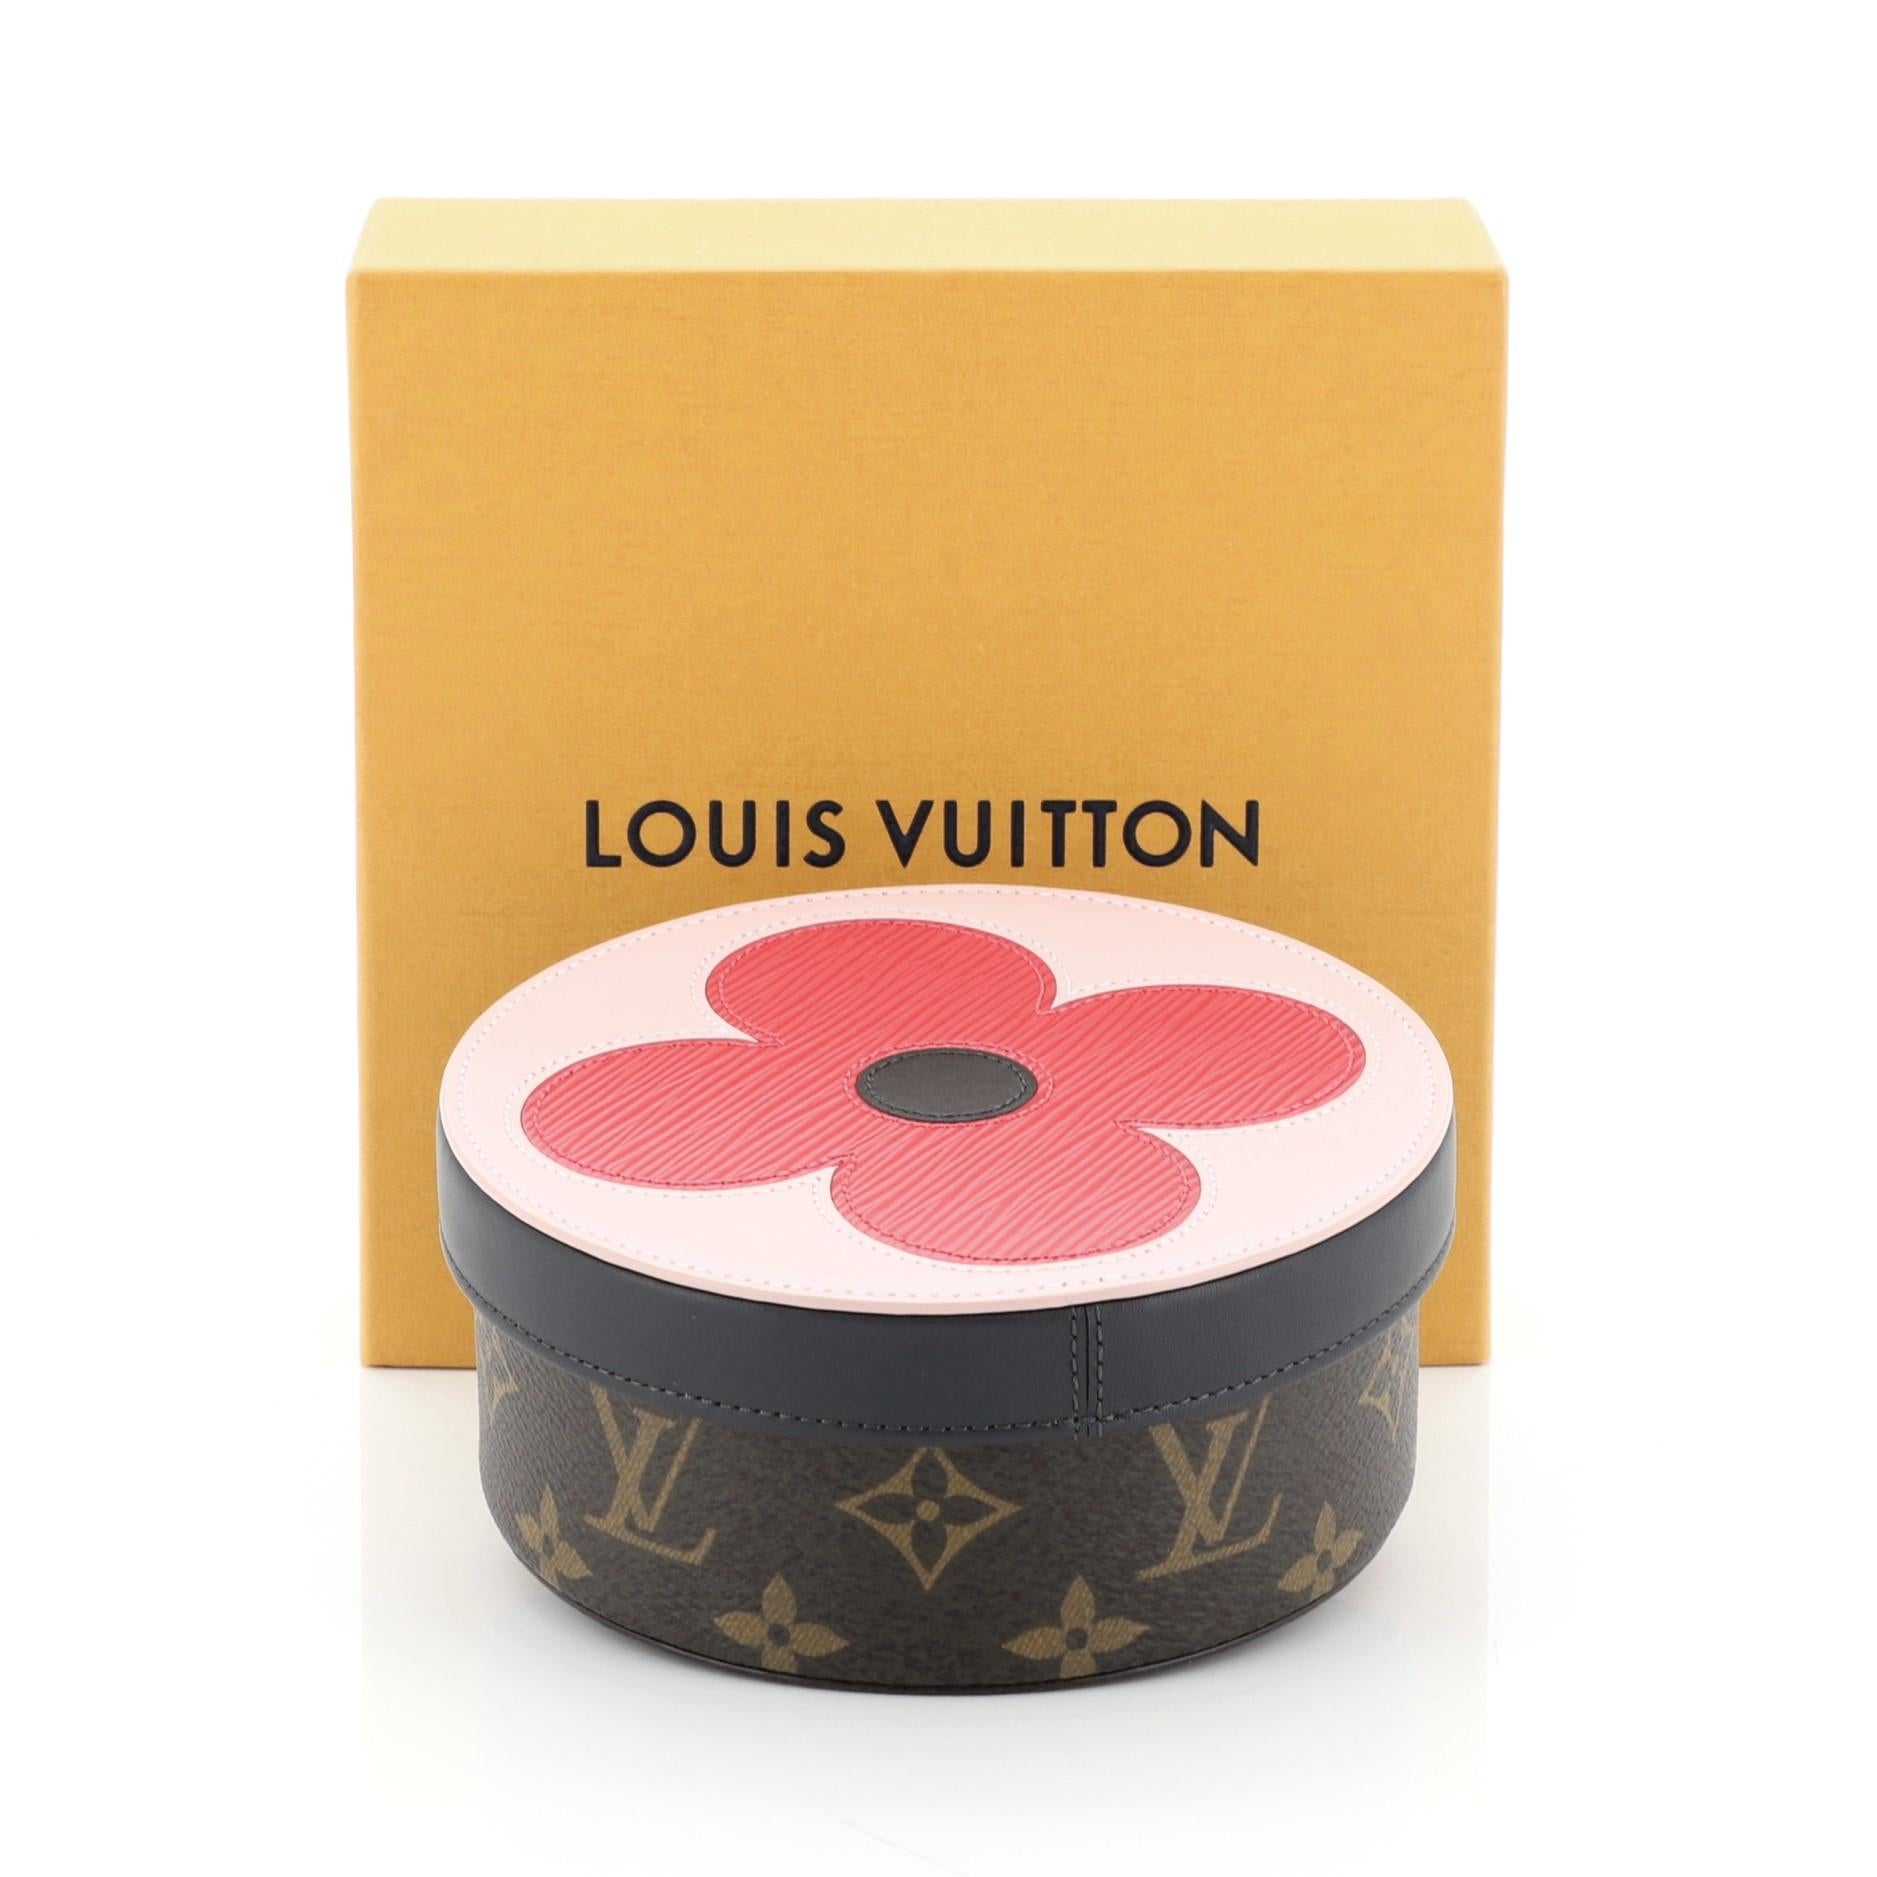 This Louis Vuitton Eugenie Box Epi Leather and Monogram Eclipse Canvas MM, crafted in brown monogram coated canvas, features top round pink epi leather monogram fleur lid. It opens to a pink microfiber interior. Authenticity code reads: UB1108